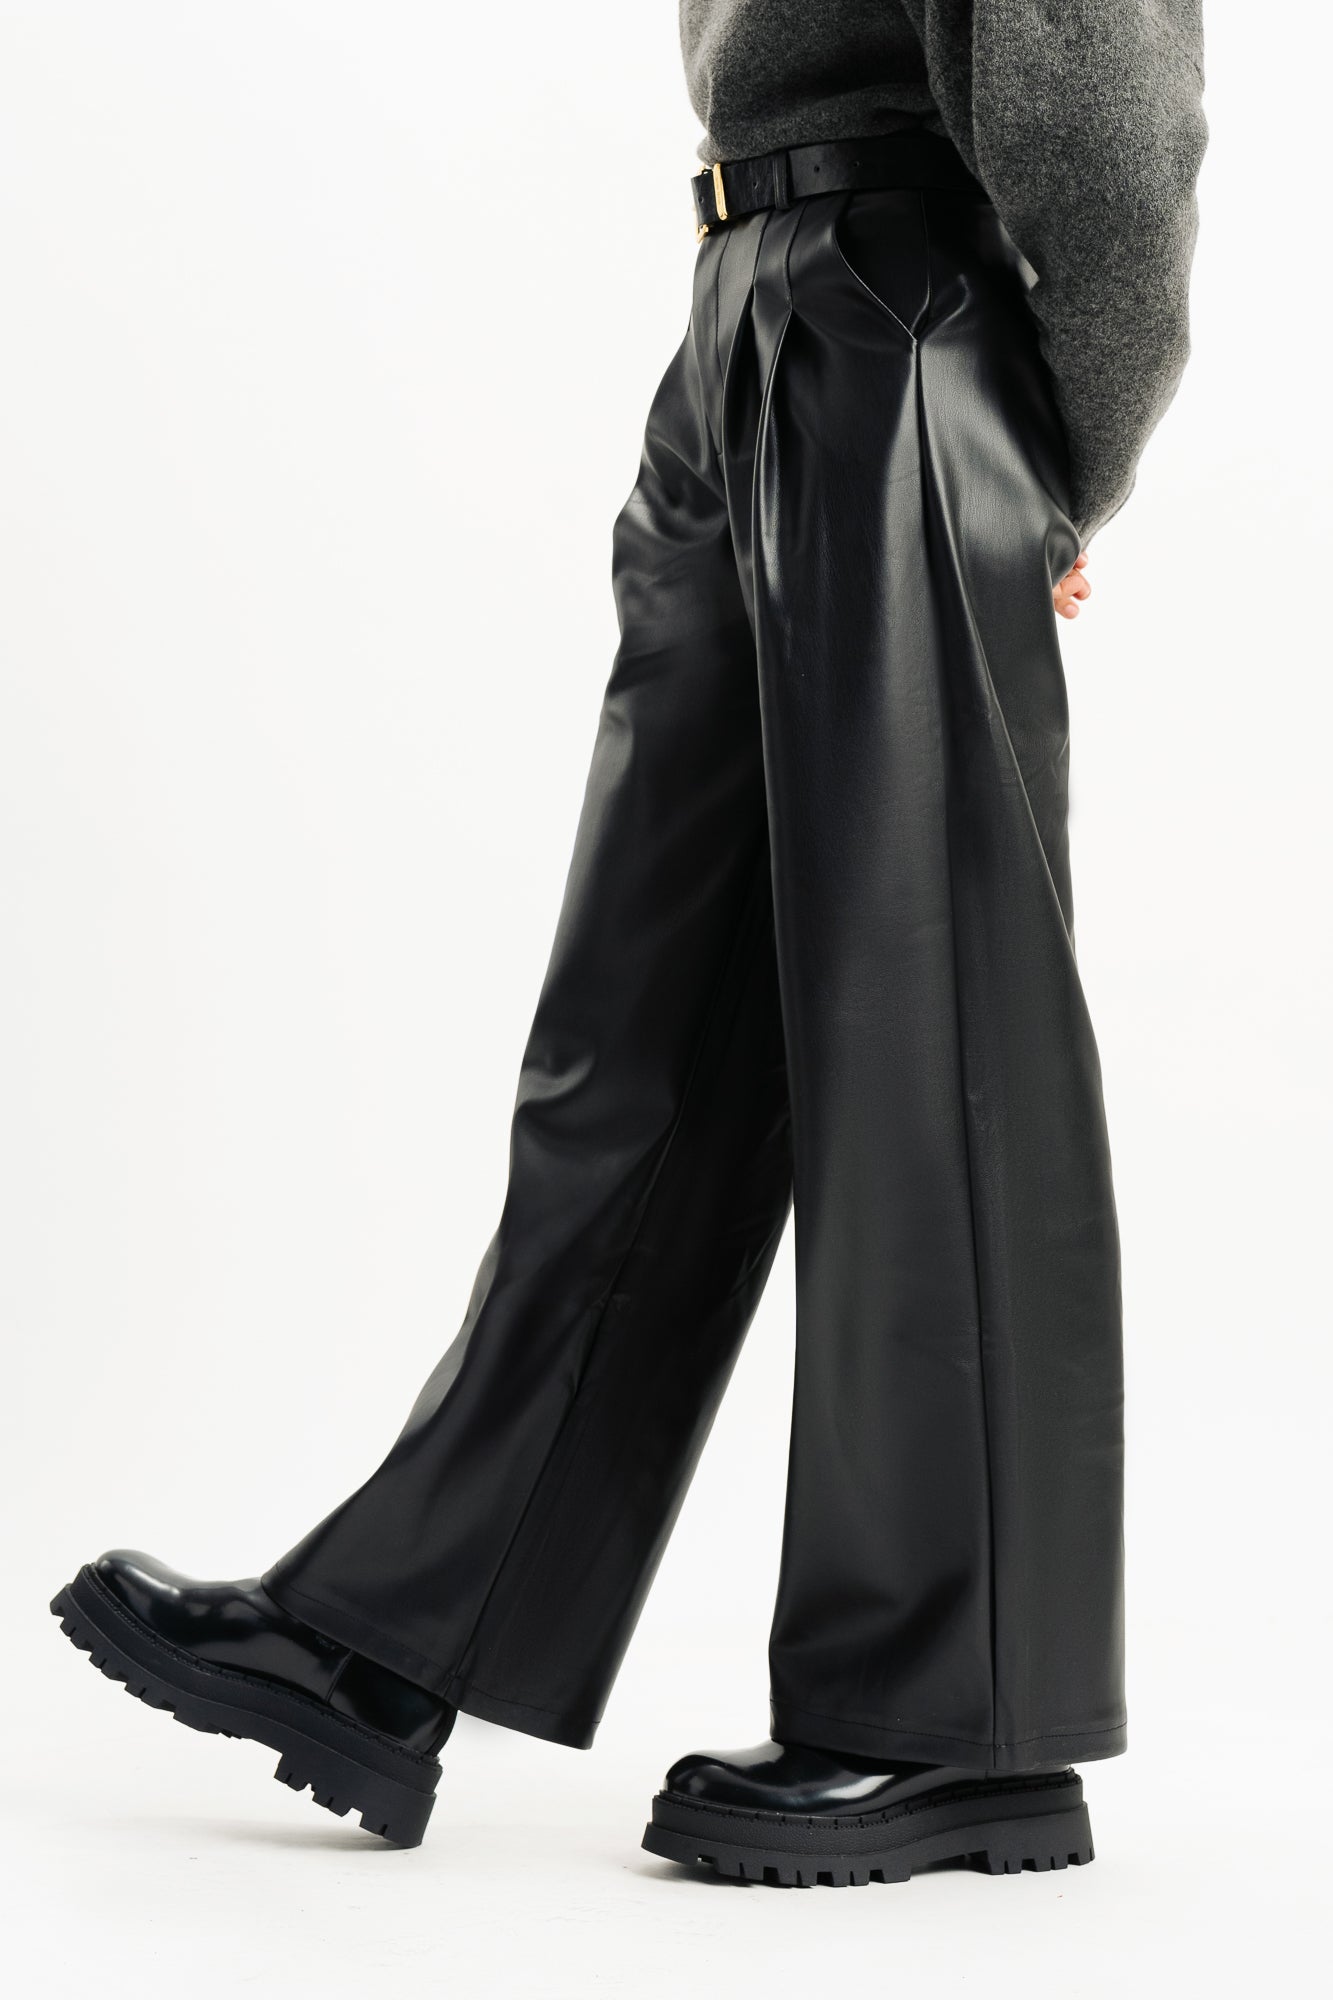 Zara bootcut black leather trousers | Vinted